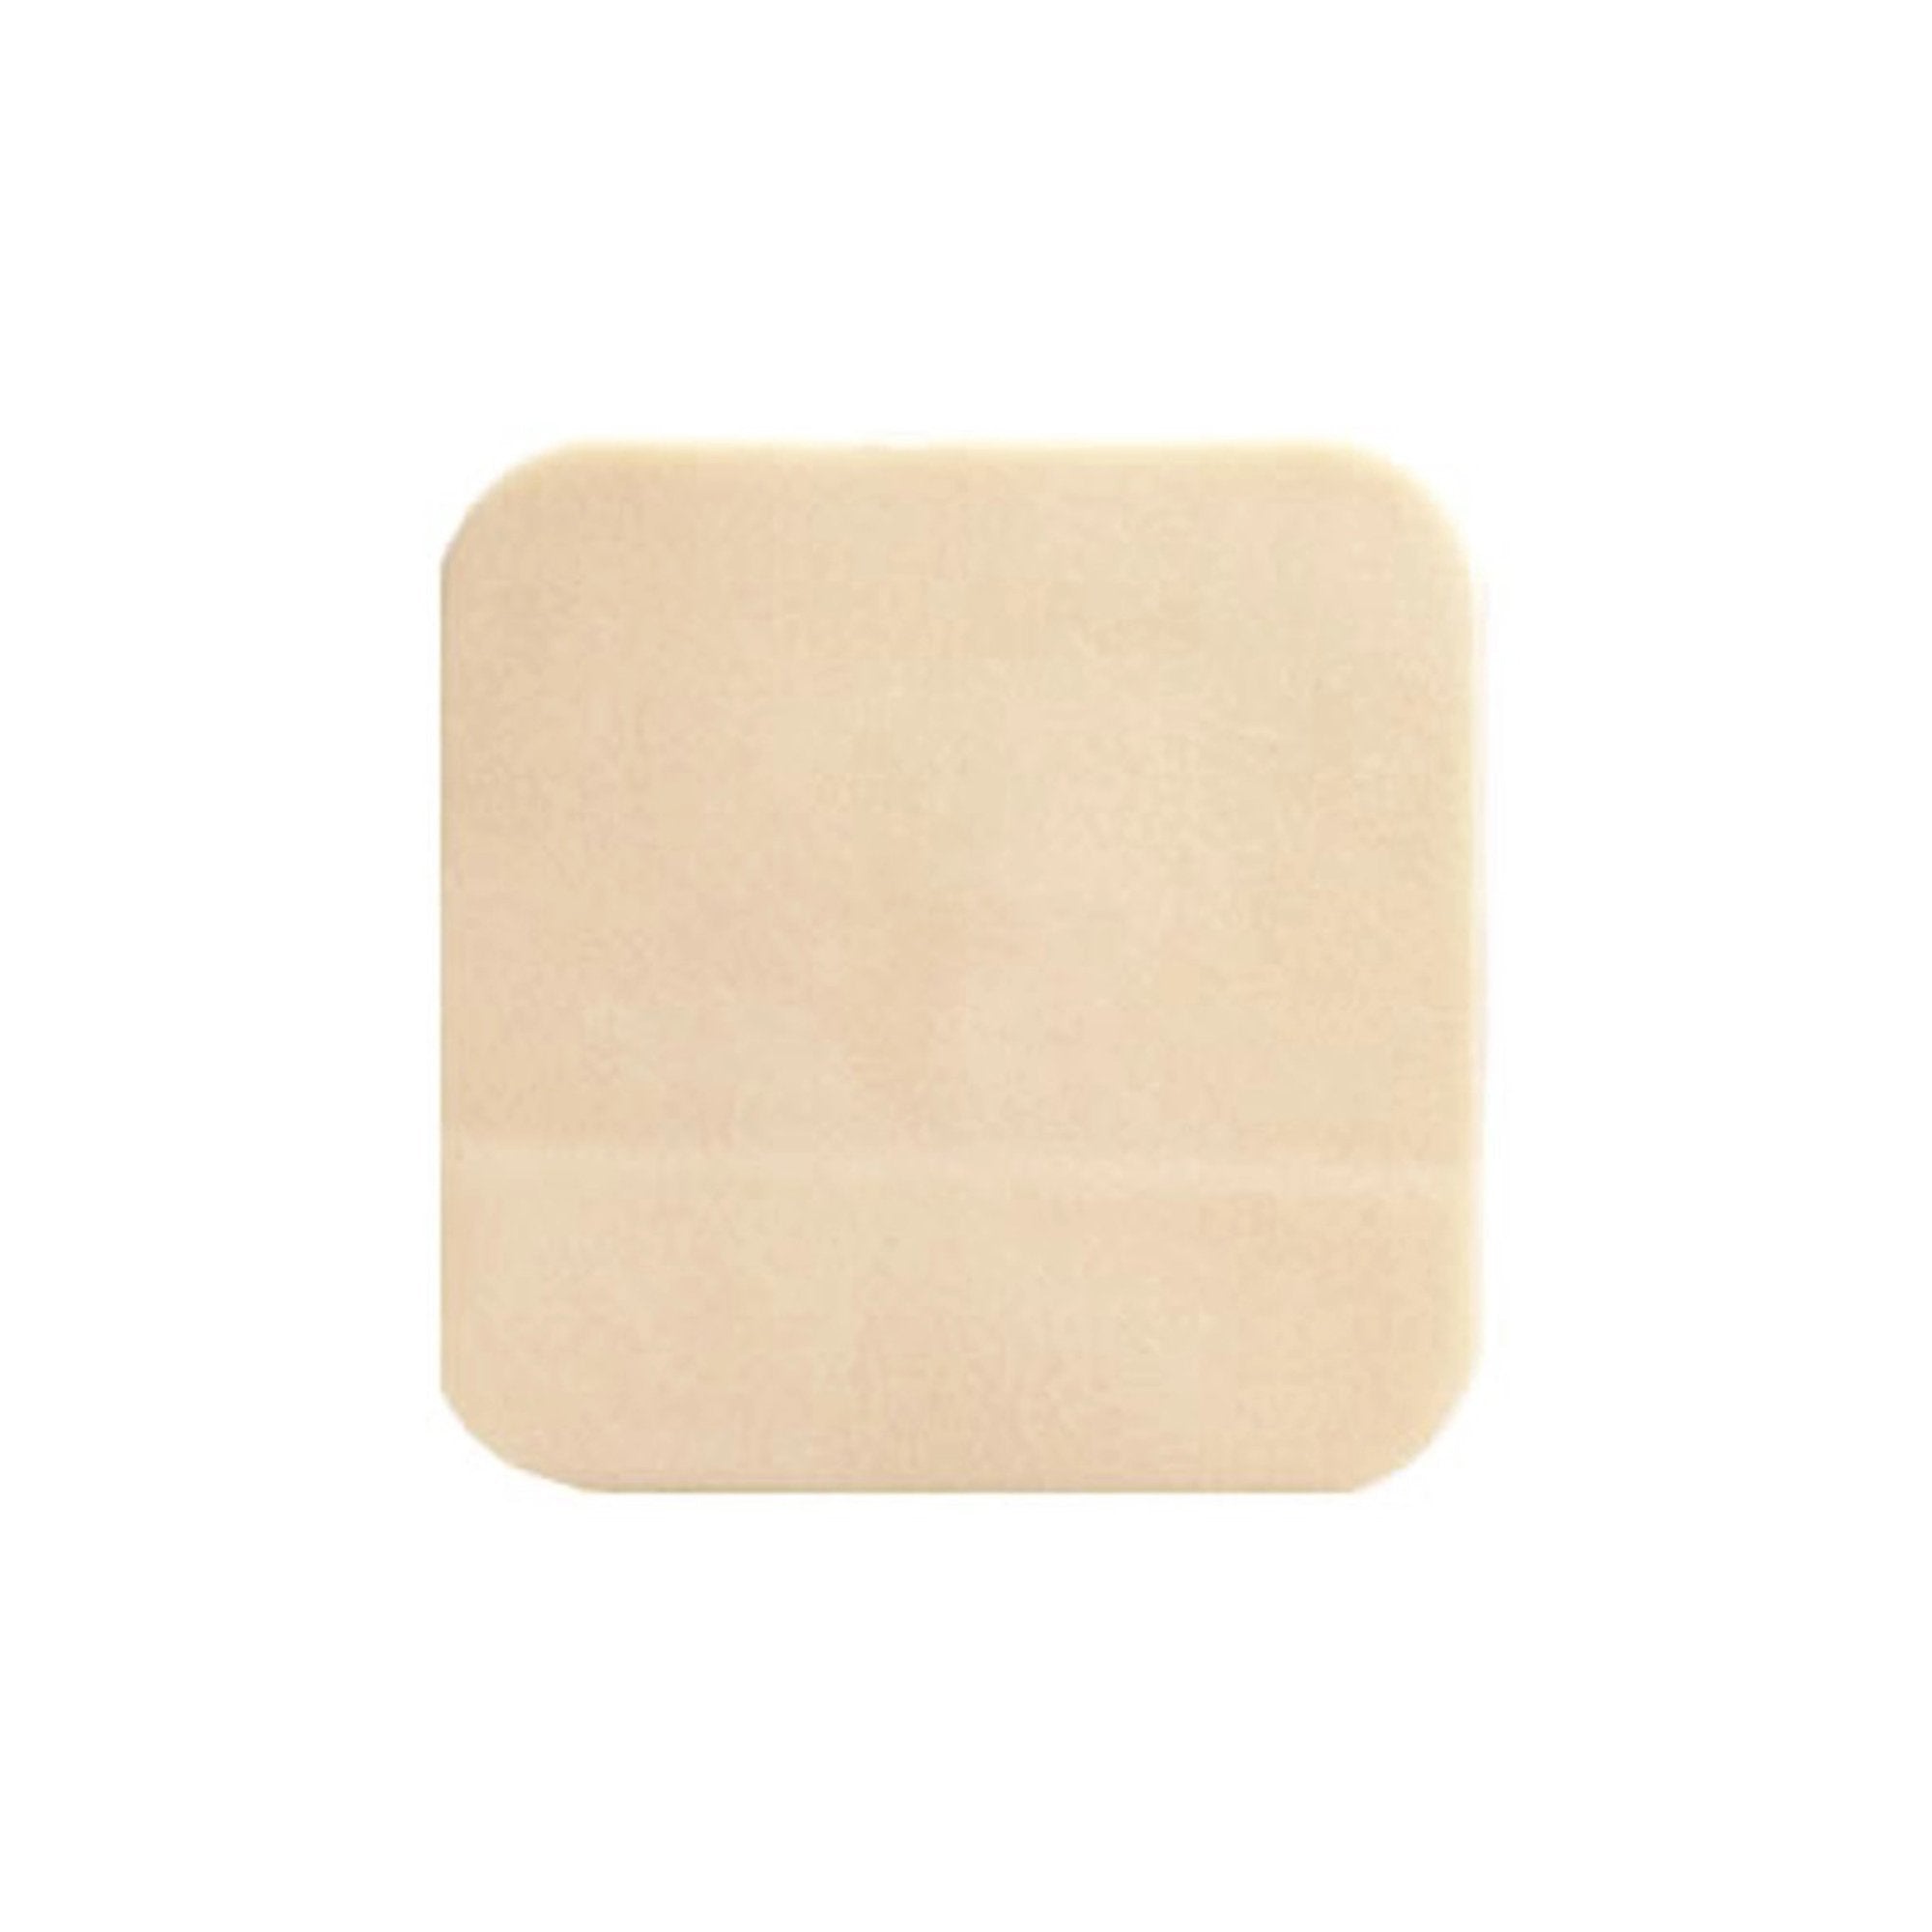 Hydrocolloid Dressing DuoDERM CGF 6 X 6 Inch Square Sterile